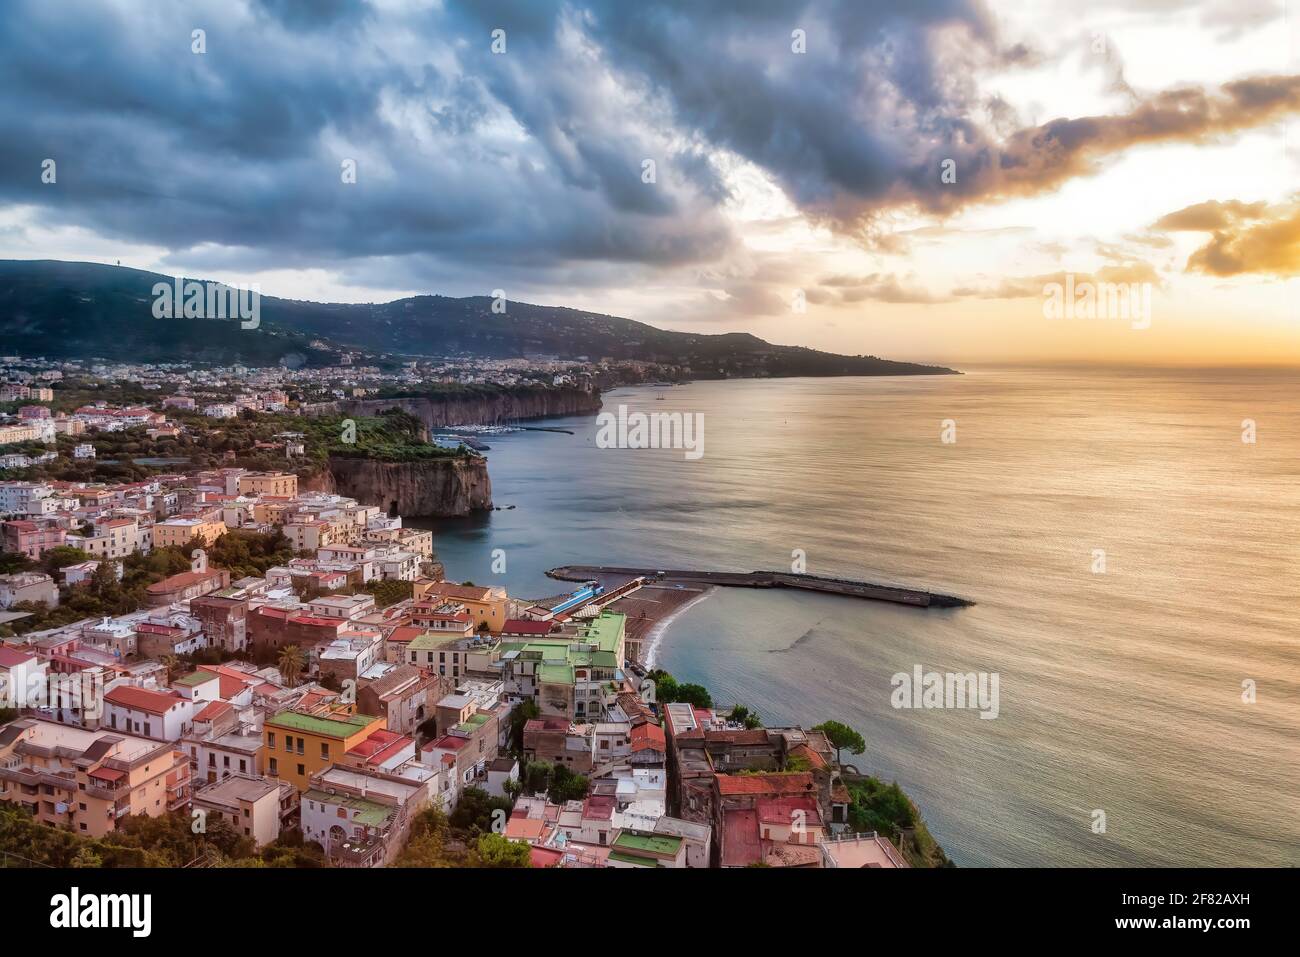 Sunset over the Sorrento coastline. Sorrento is a town overlooking the Bay of Naples in Southern Italy. Is become a popular tourist destination Stock Photo